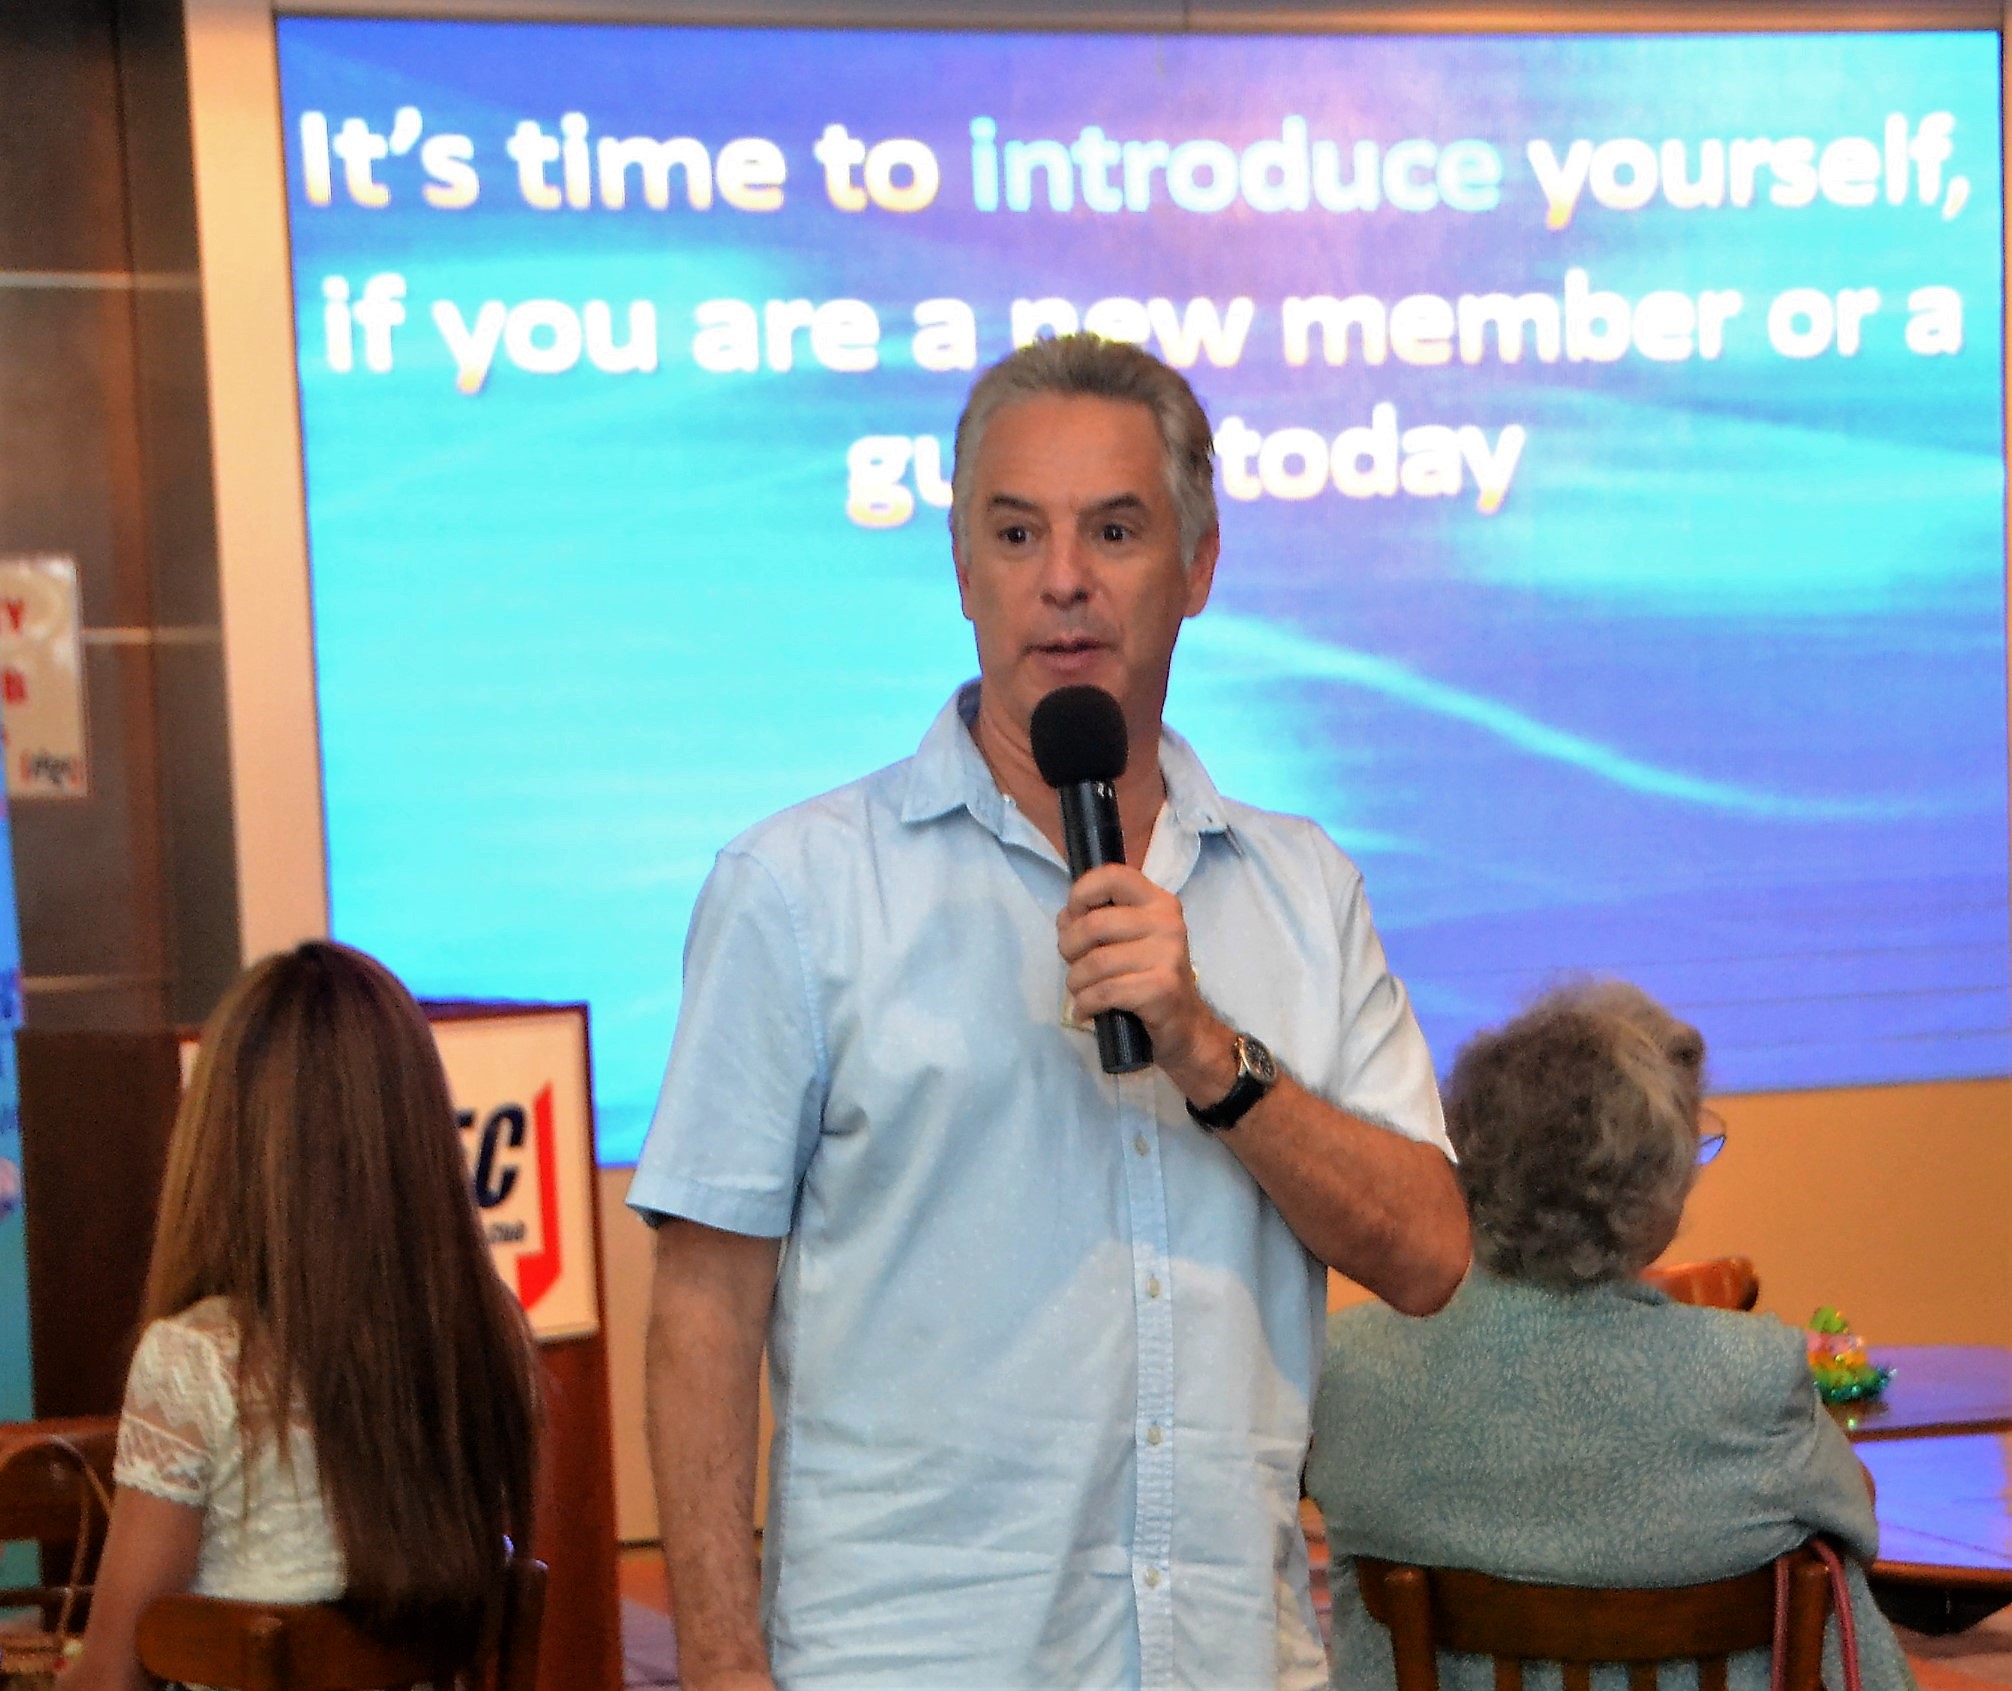 Member Ira Wettenstein moderates the Open Forum portion of the PCEC meeting, where questions are asked and answered about Expat living in Thailand, especially Pattaya.